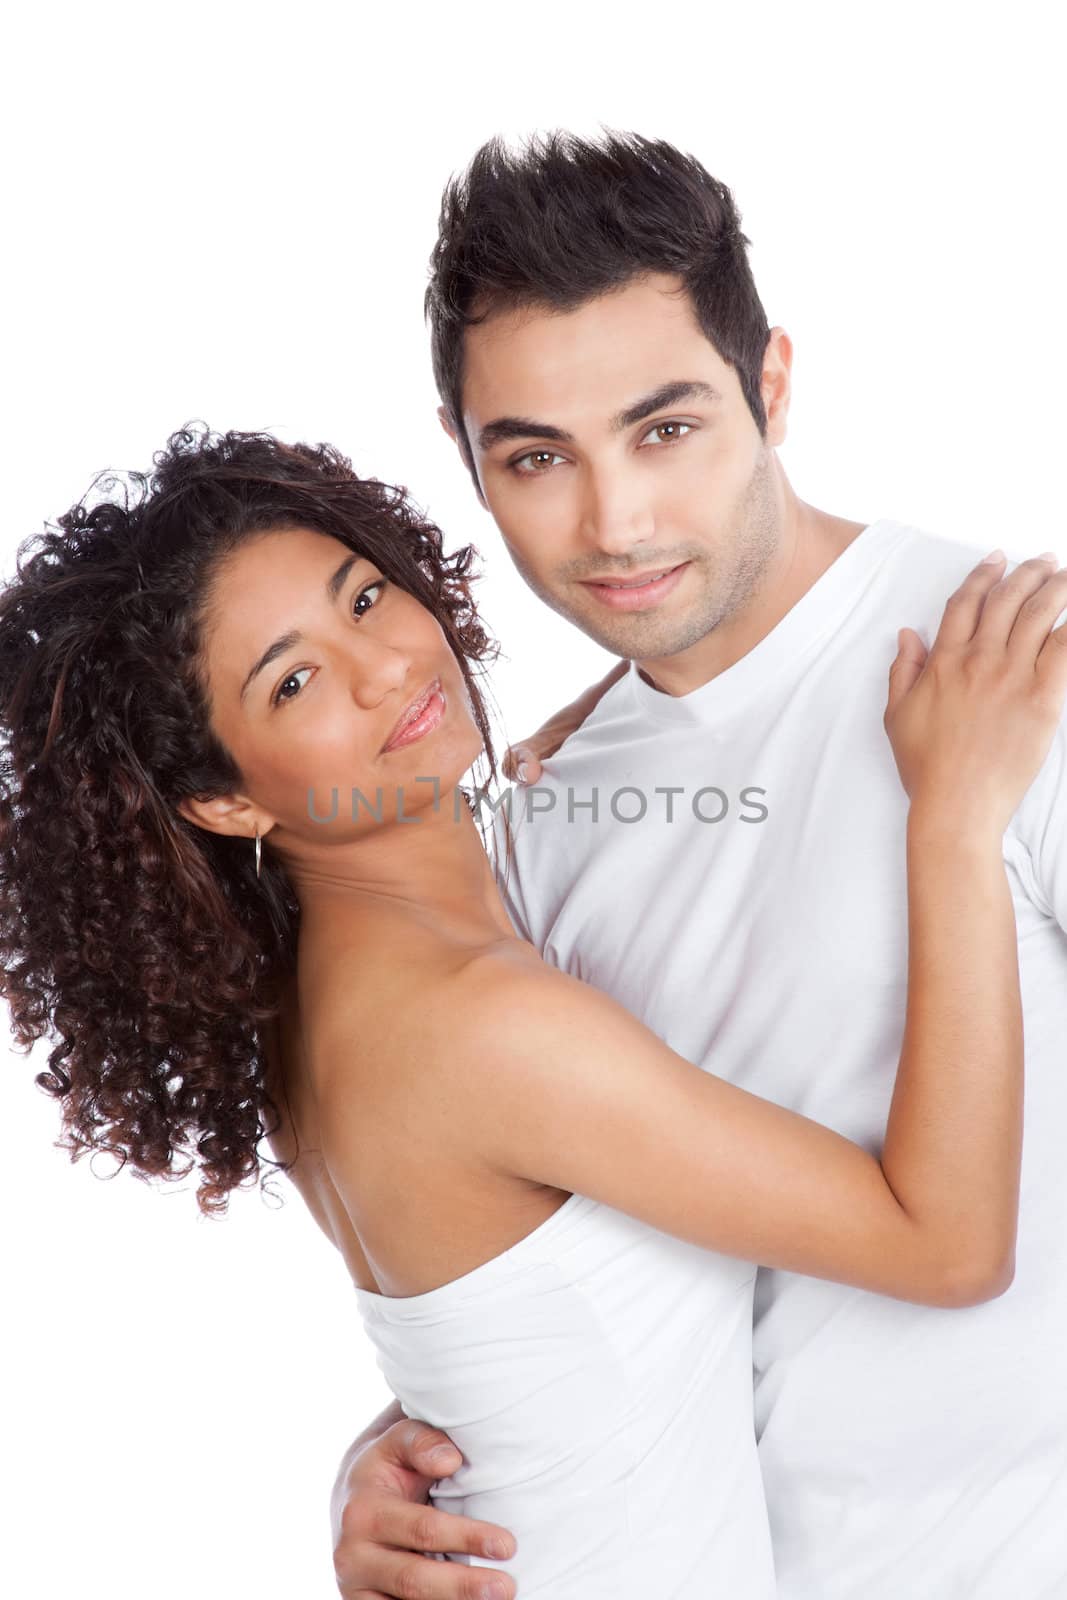 Portrait of diverse young couple isolated on white background.